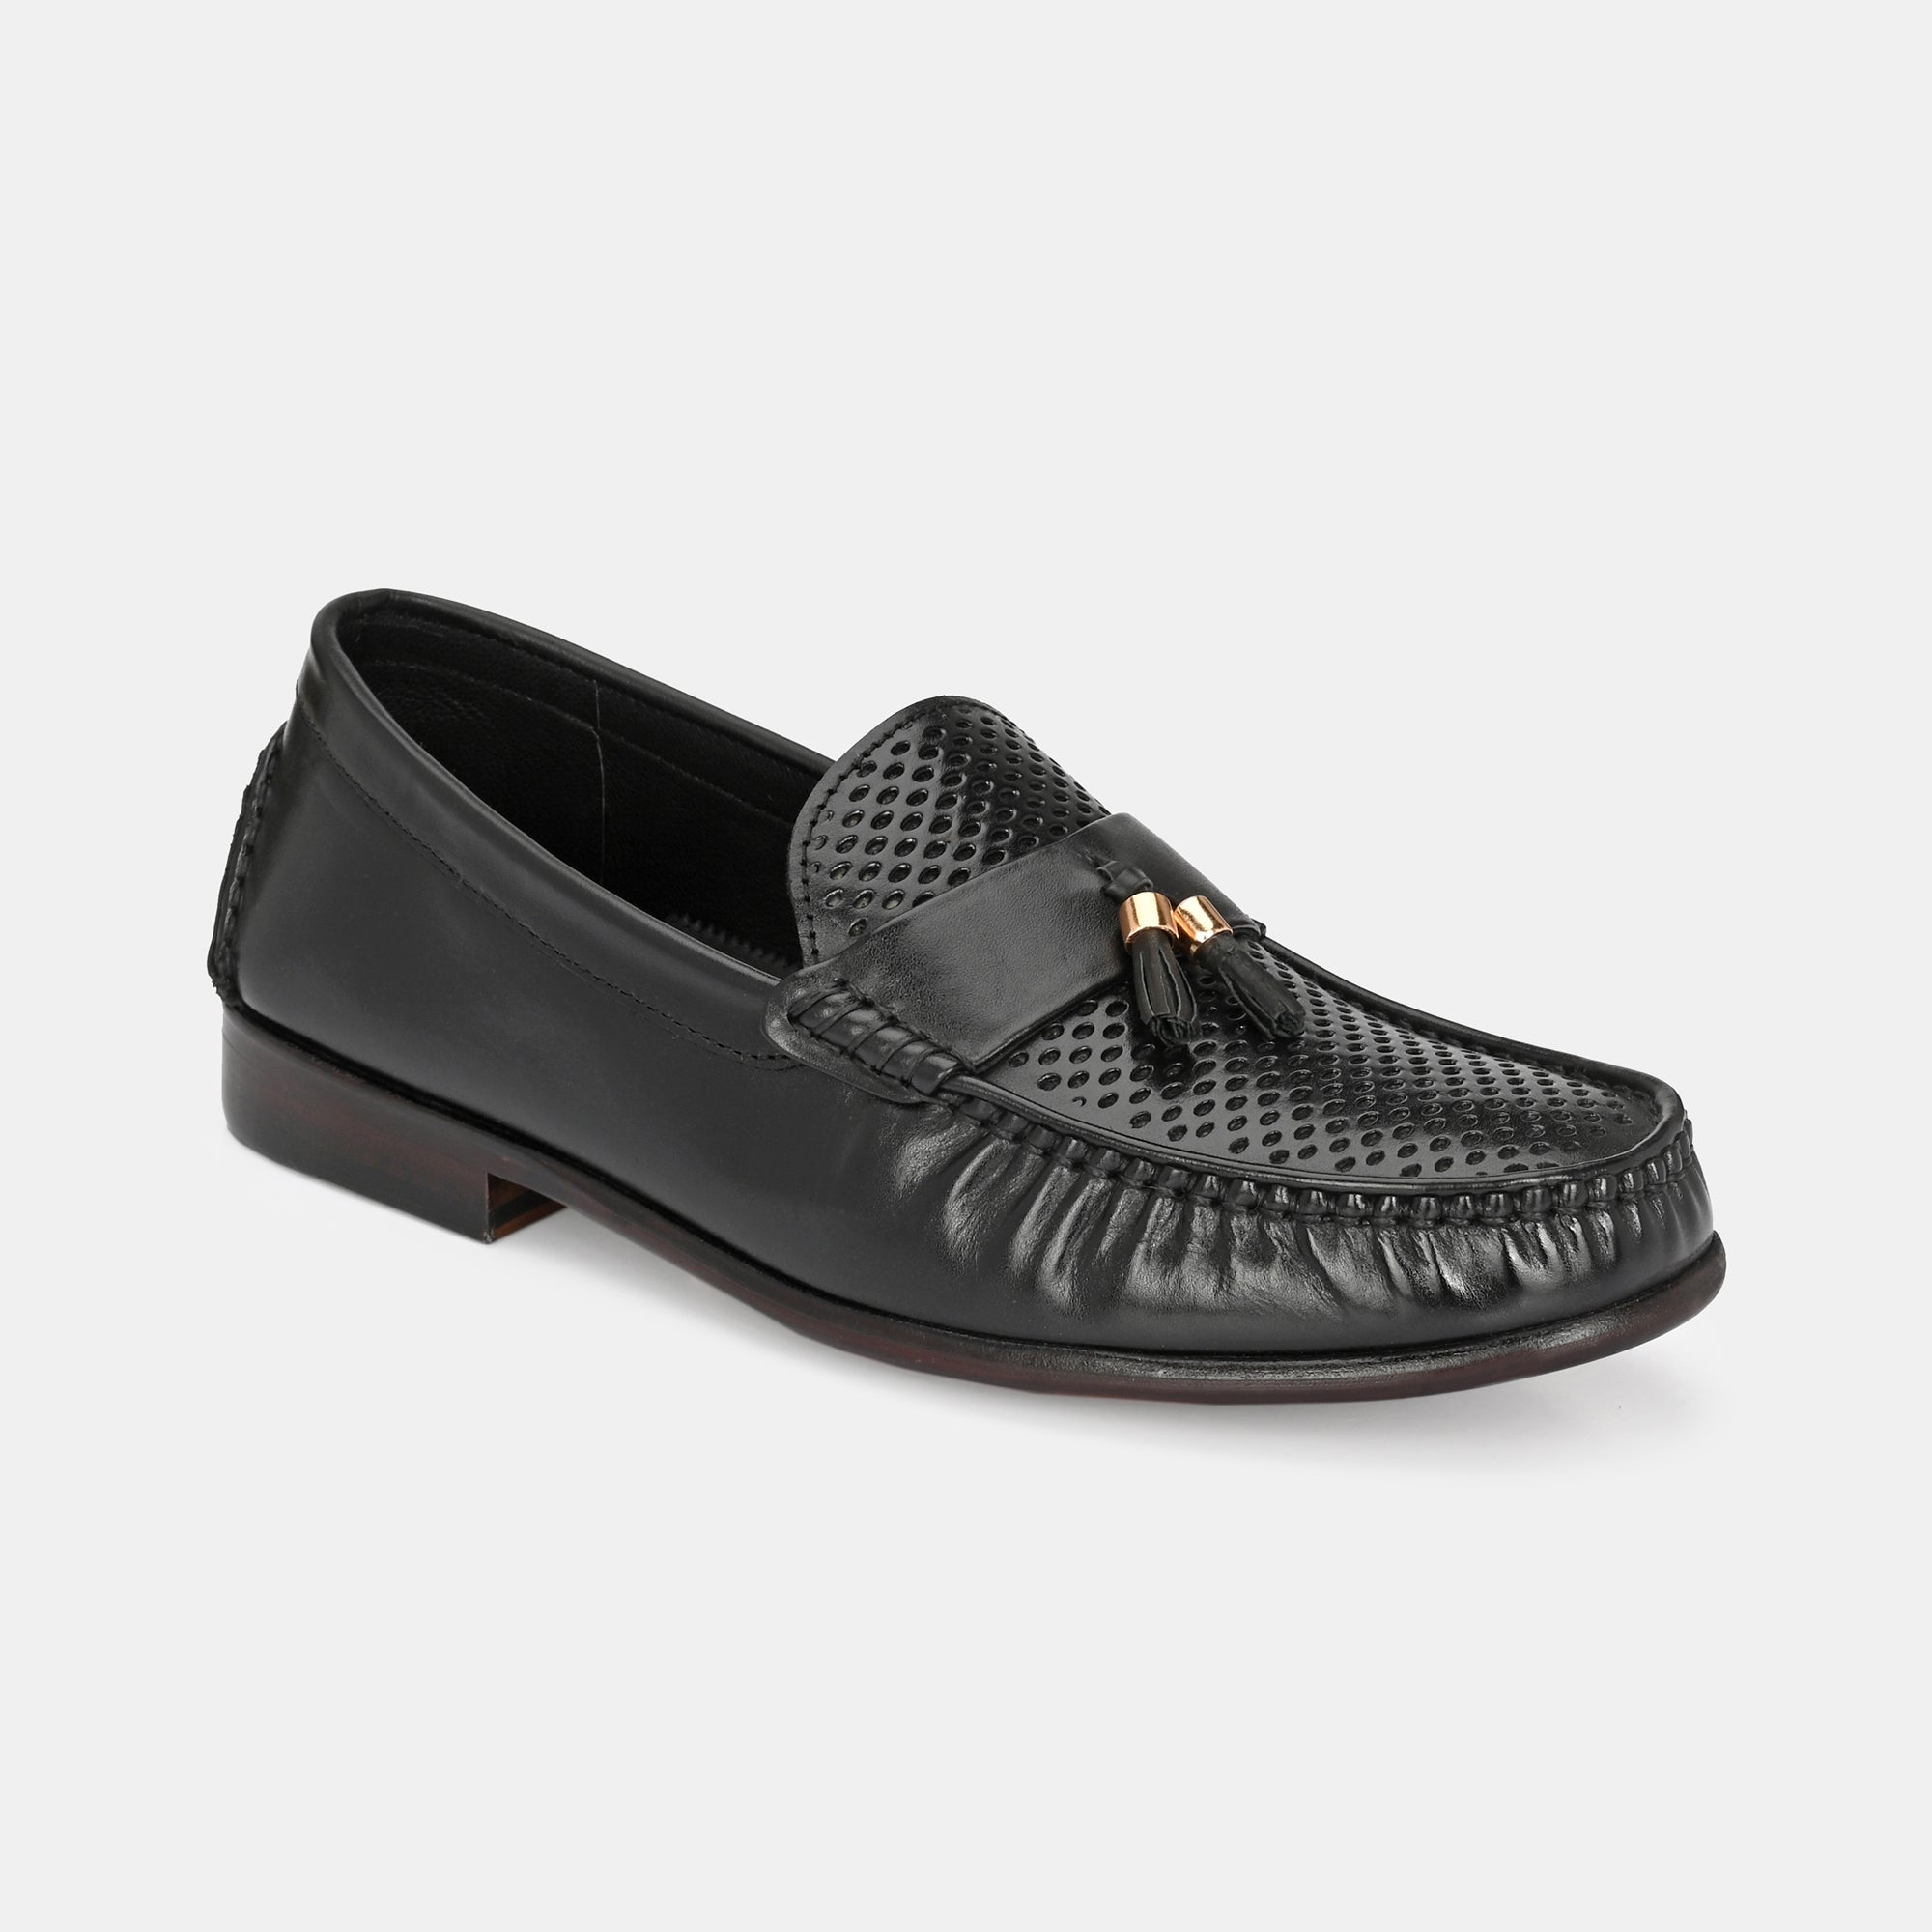 Black Perforated Tassel Loafers by Lafattio